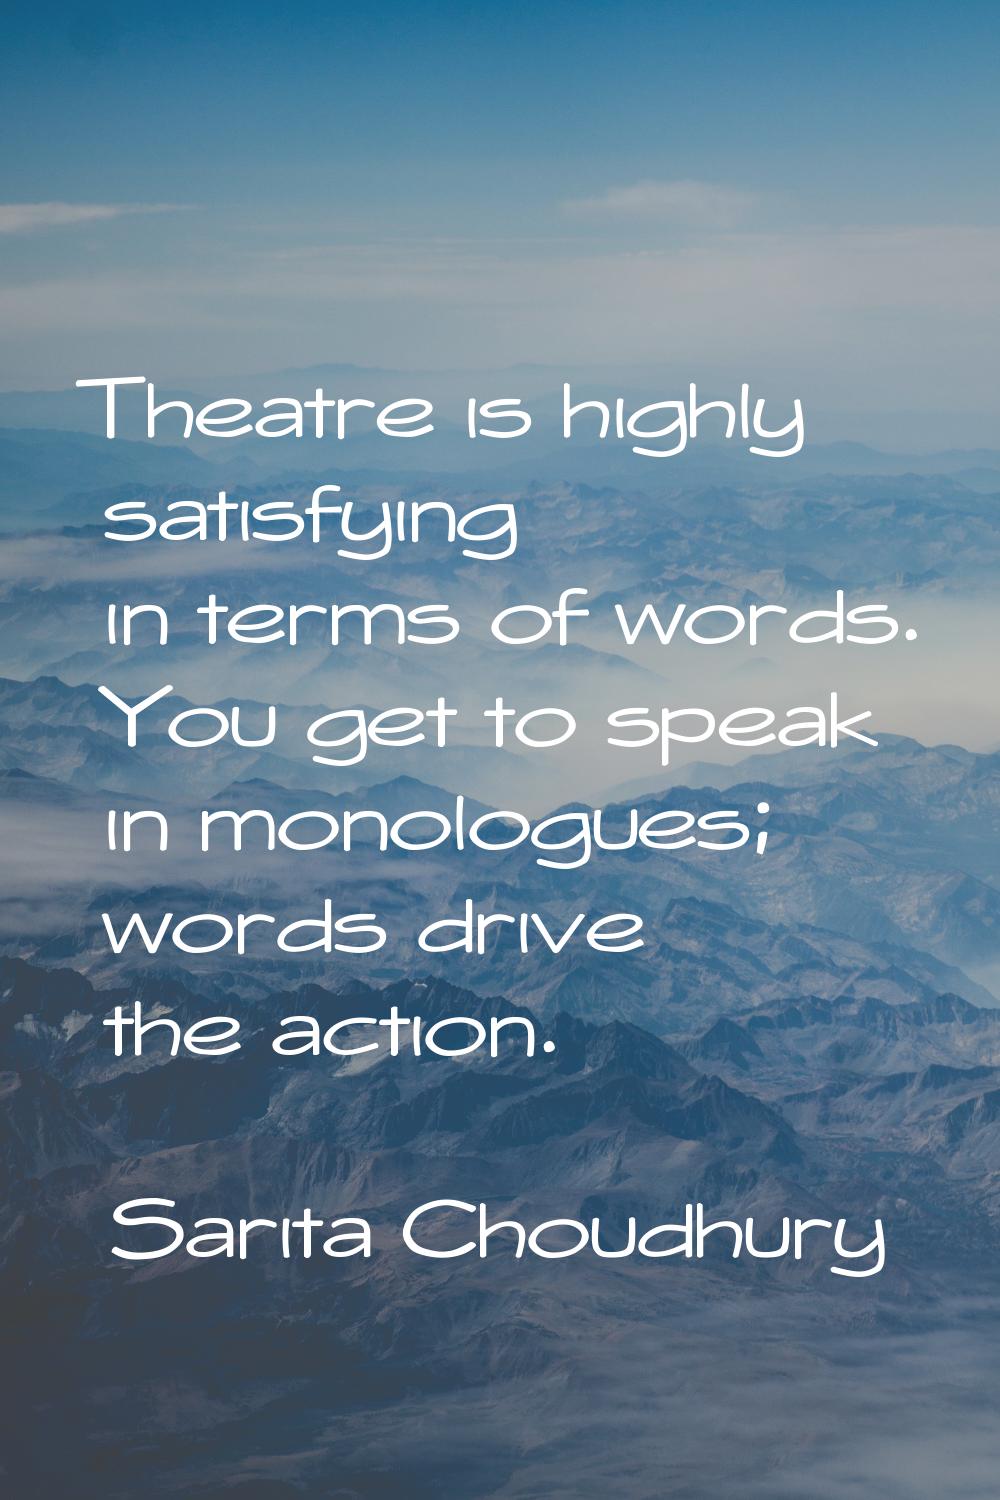 Theatre is highly satisfying in terms of words. You get to speak in monologues; words drive the act